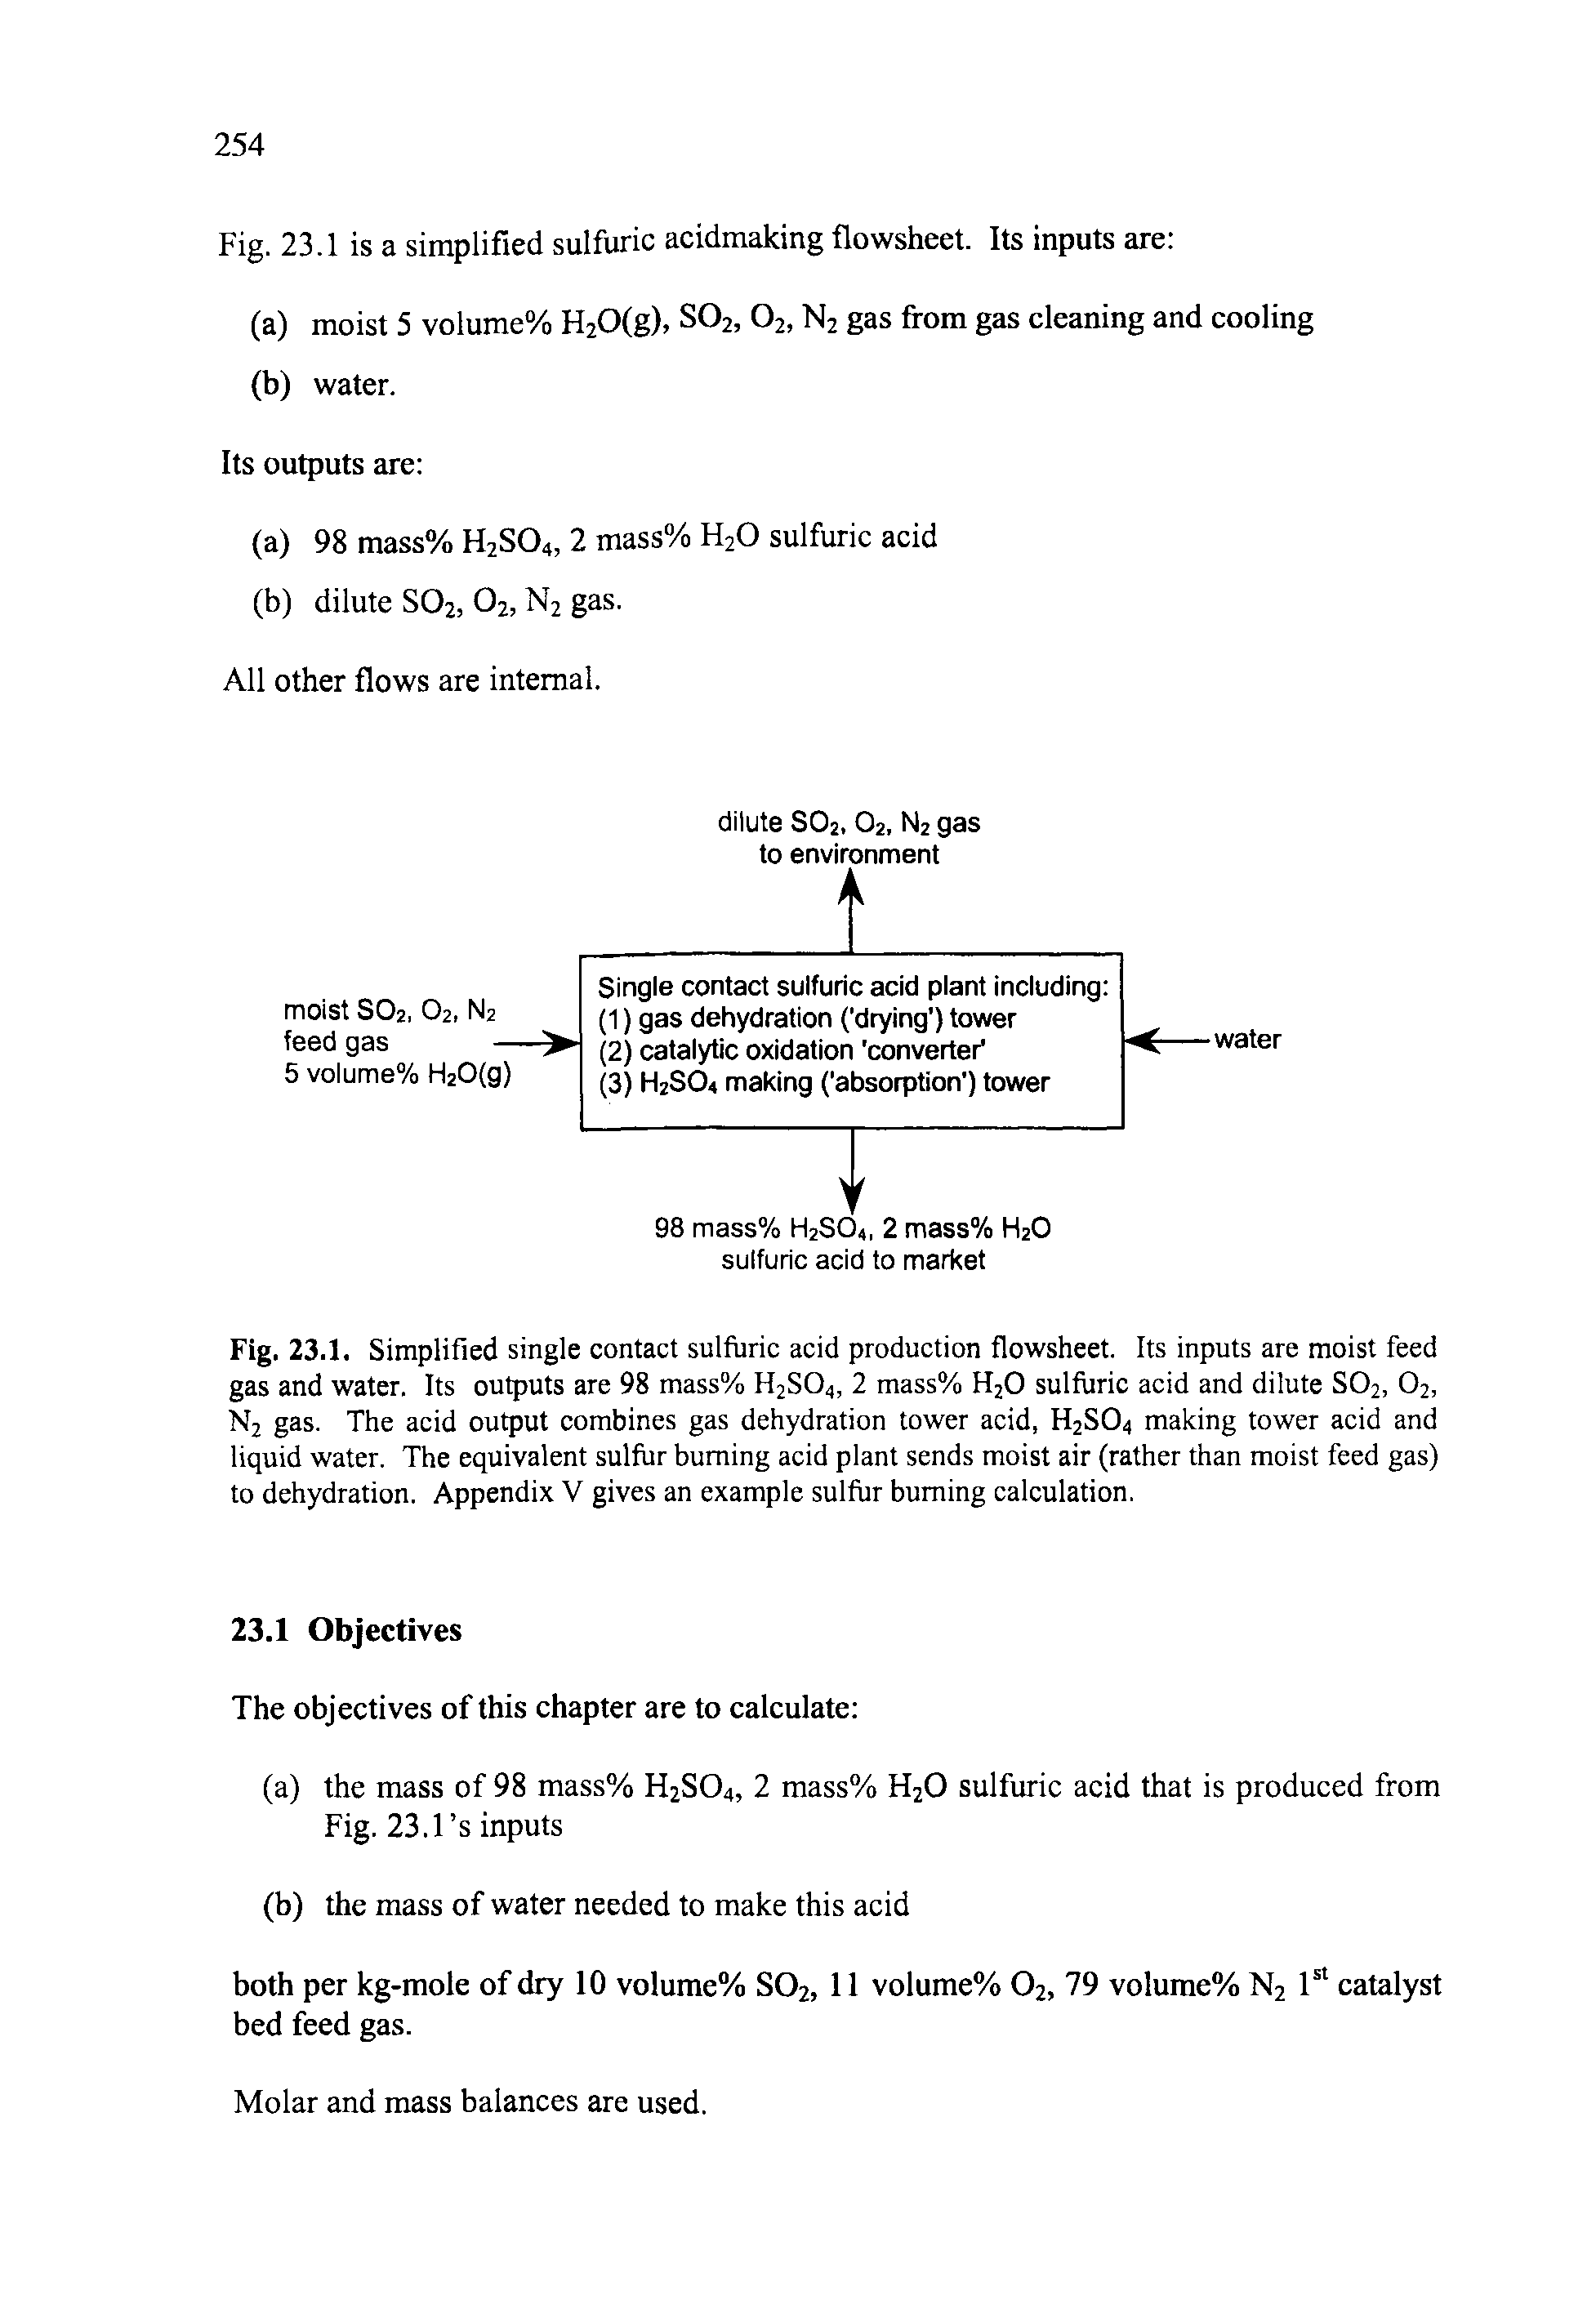 Fig. 23.1. Simplified single contact sulfuric acid production flowsheet. Its inputs are moist feed gas and water. Its outputs are 98 mass% H2S04, 2 mass% H20 sulfuric acid and dilute S02, 02, N2 gas. The acid output combines gas dehydration tower acid, H2S04 making tower acid and liquid water. The equivalent sulfur burning acid plant sends moist air (rather than moist feed gas) to dehydration. Appendix V gives an example sulfur burning calculation.